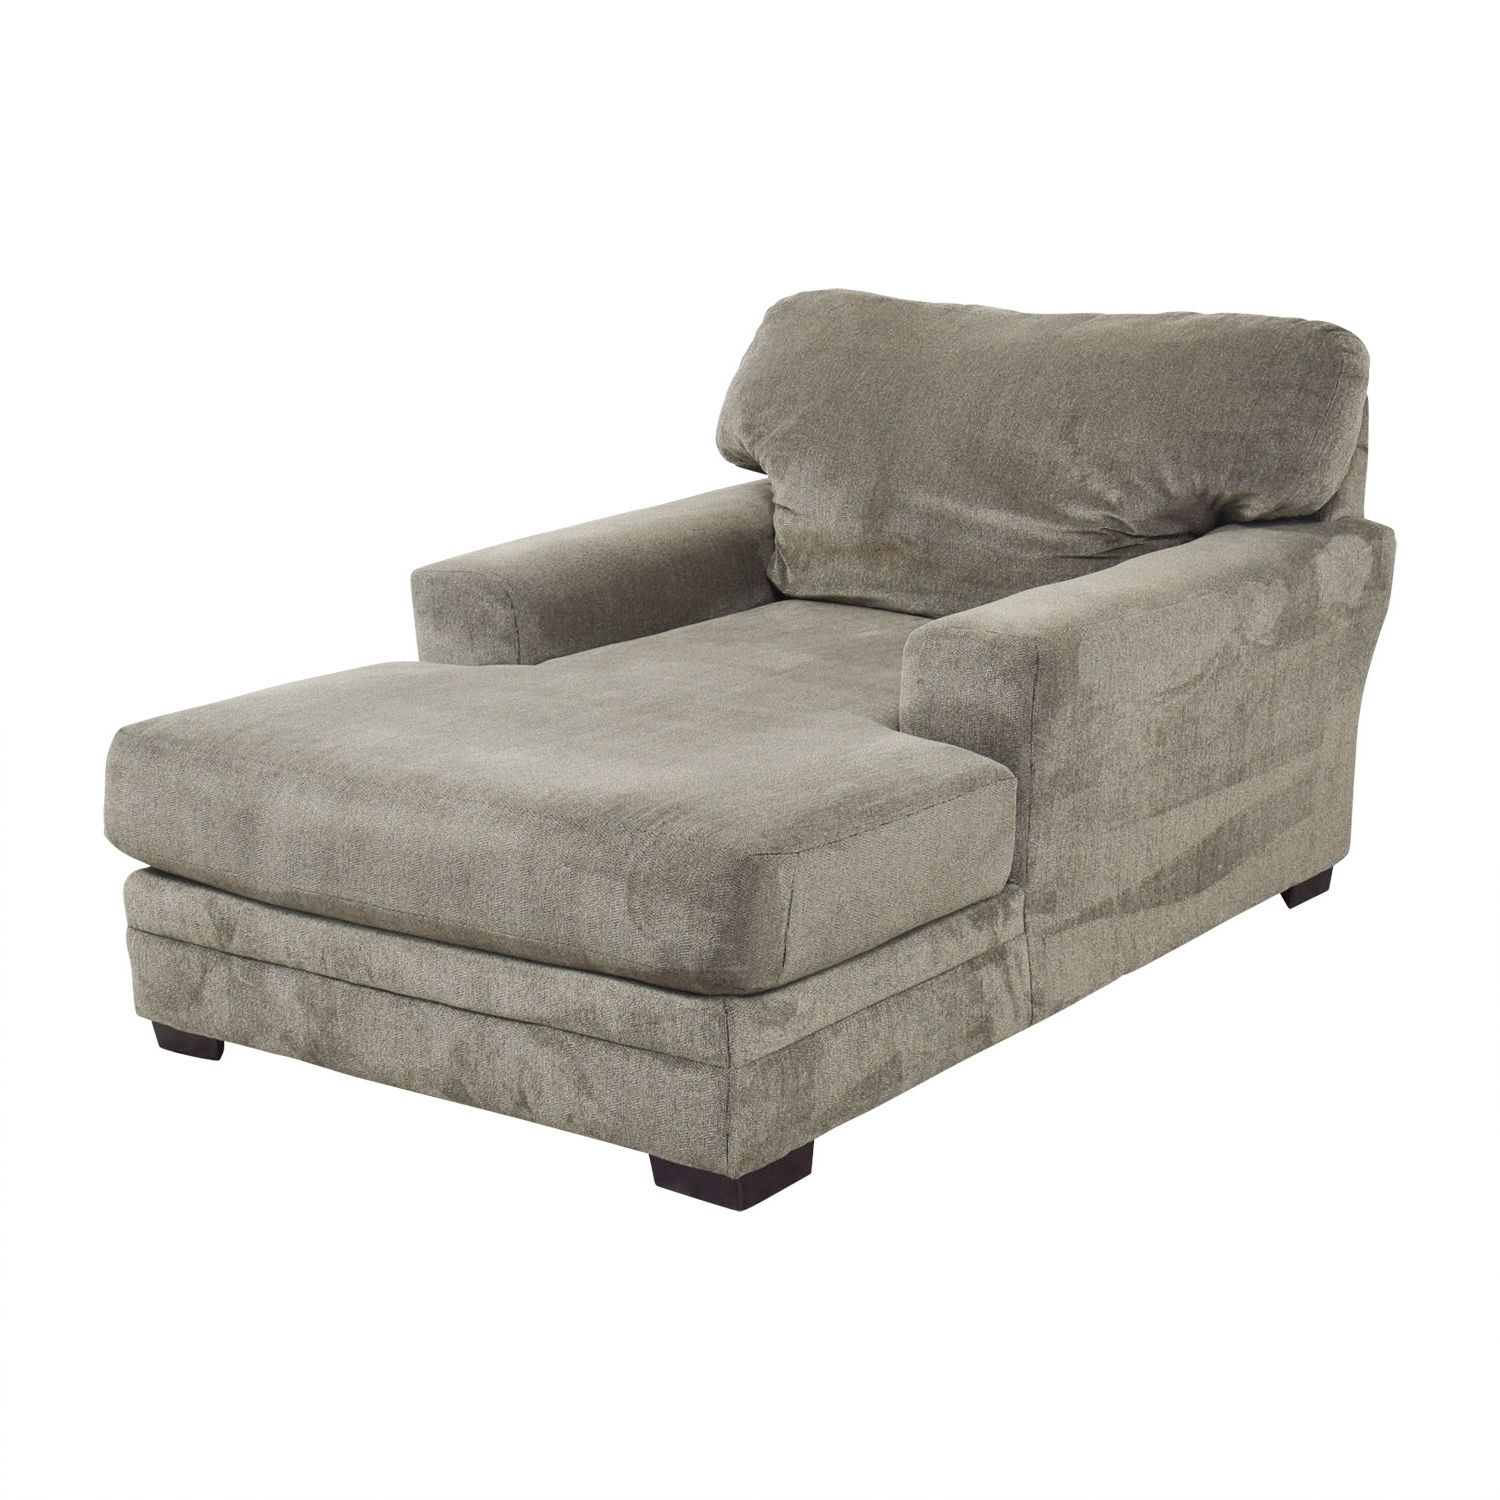 [%81% Off – Bob's Furniture Bob's Furniture Grey Chaise Lounge / Sofas With Preferred Grey Chaise Lounges|grey Chaise Lounges For Most Popular 81% Off – Bob's Furniture Bob's Furniture Grey Chaise Lounge / Sofas|famous Grey Chaise Lounges With Regard To 81% Off – Bob's Furniture Bob's Furniture Grey Chaise Lounge / Sofas|favorite 81% Off – Bob's Furniture Bob's Furniture Grey Chaise Lounge / Sofas Regarding Grey Chaise Lounges%] (Photo 15 of 15)